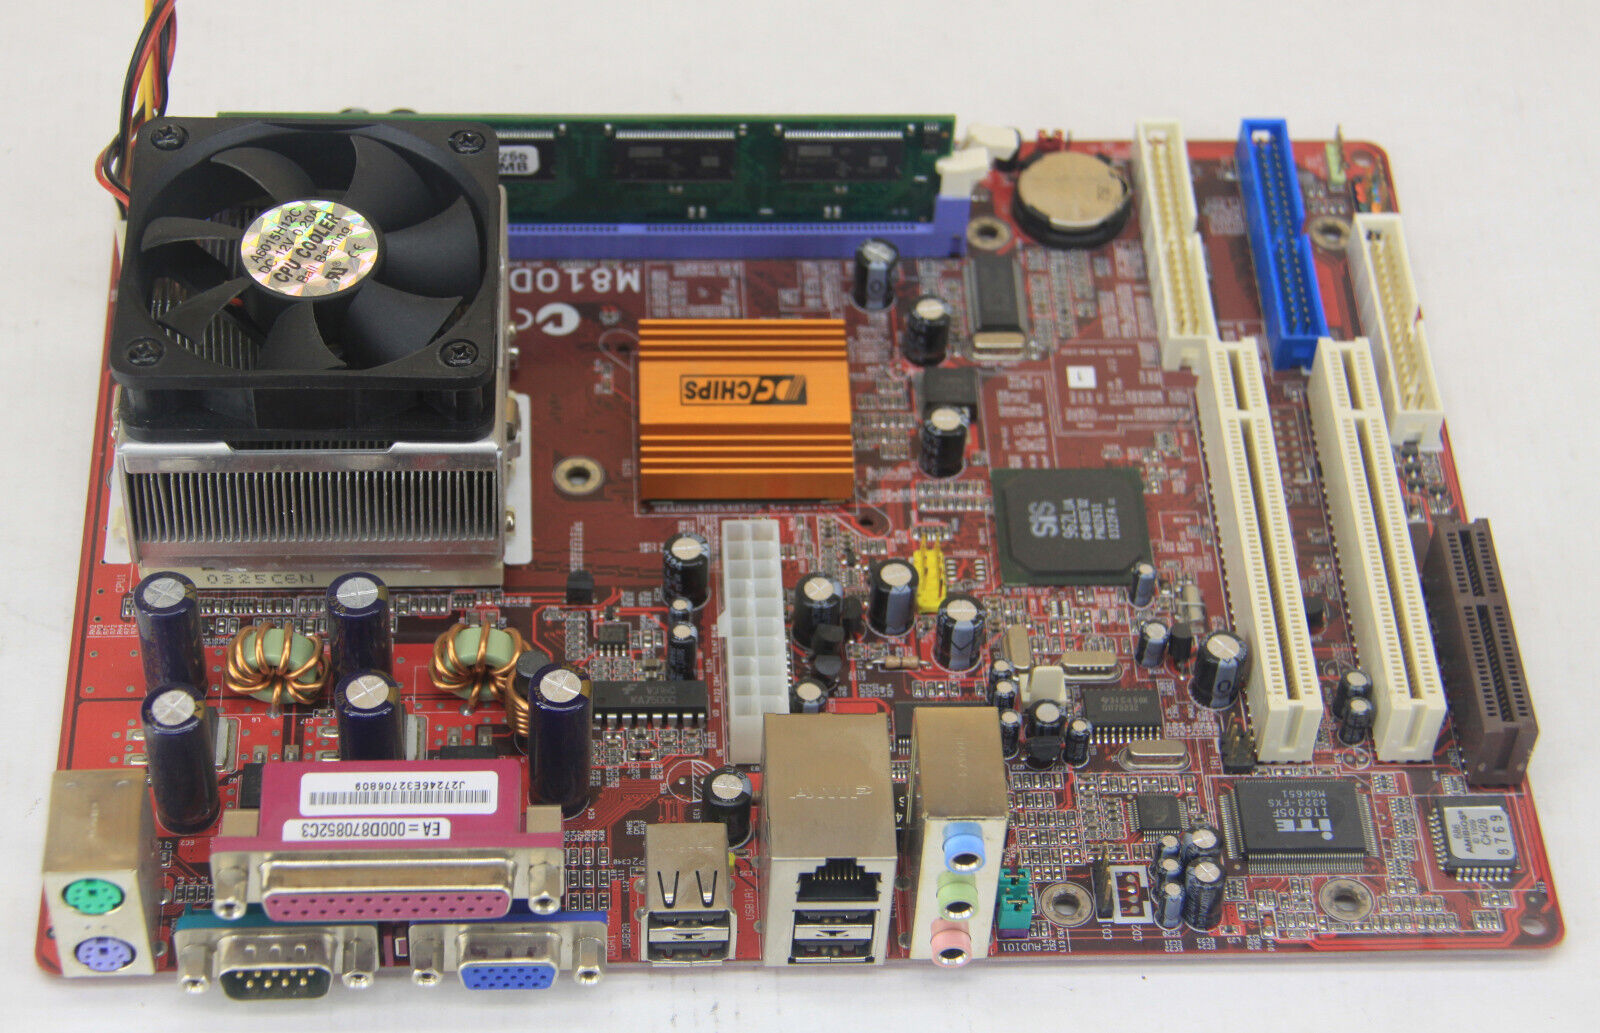 PC Chips M810D V7.5A  Motherboard microATX AMD Duron 750Mhz 128MB SDRAM